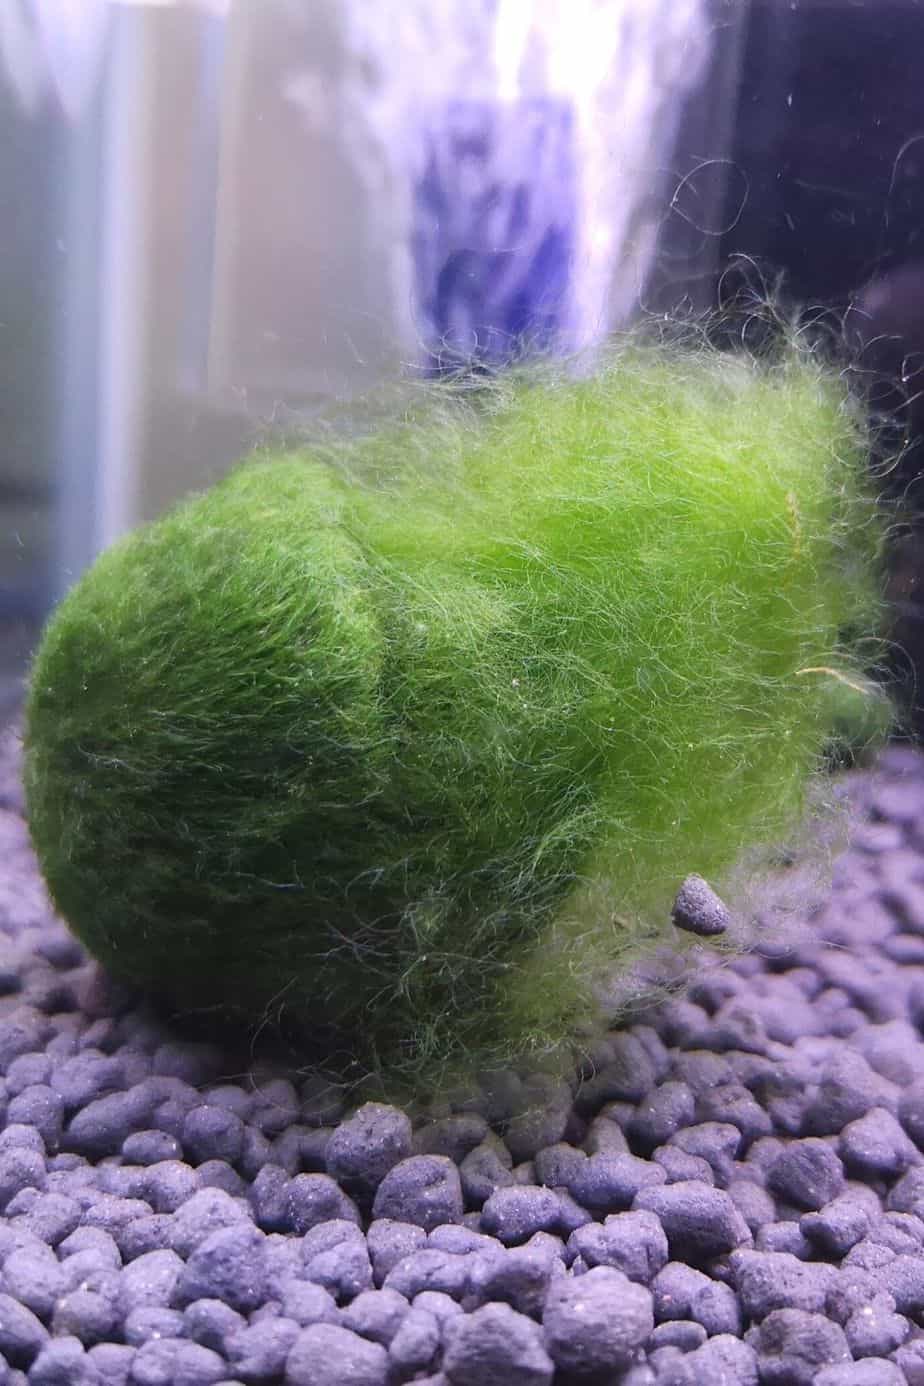 Cladophora Moss Ball does not drown in water even if you submerge it